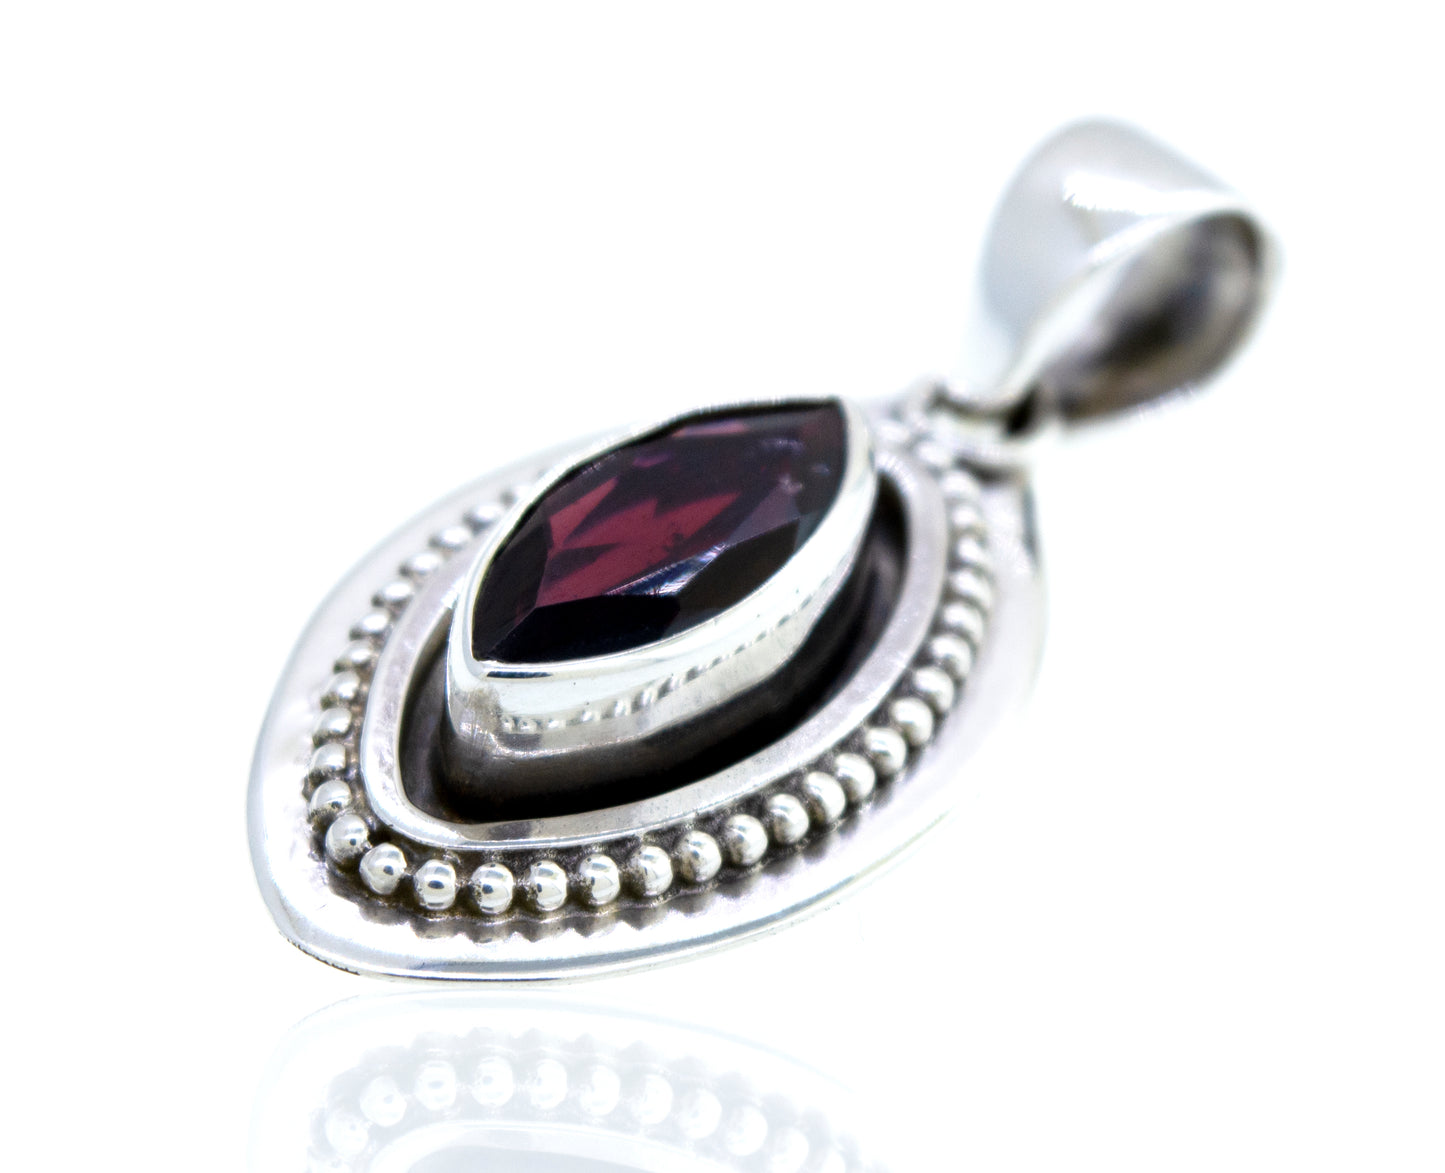 A Beautiful Marquise Shaped Garnet Pendant with Beads Design from Super Silver.